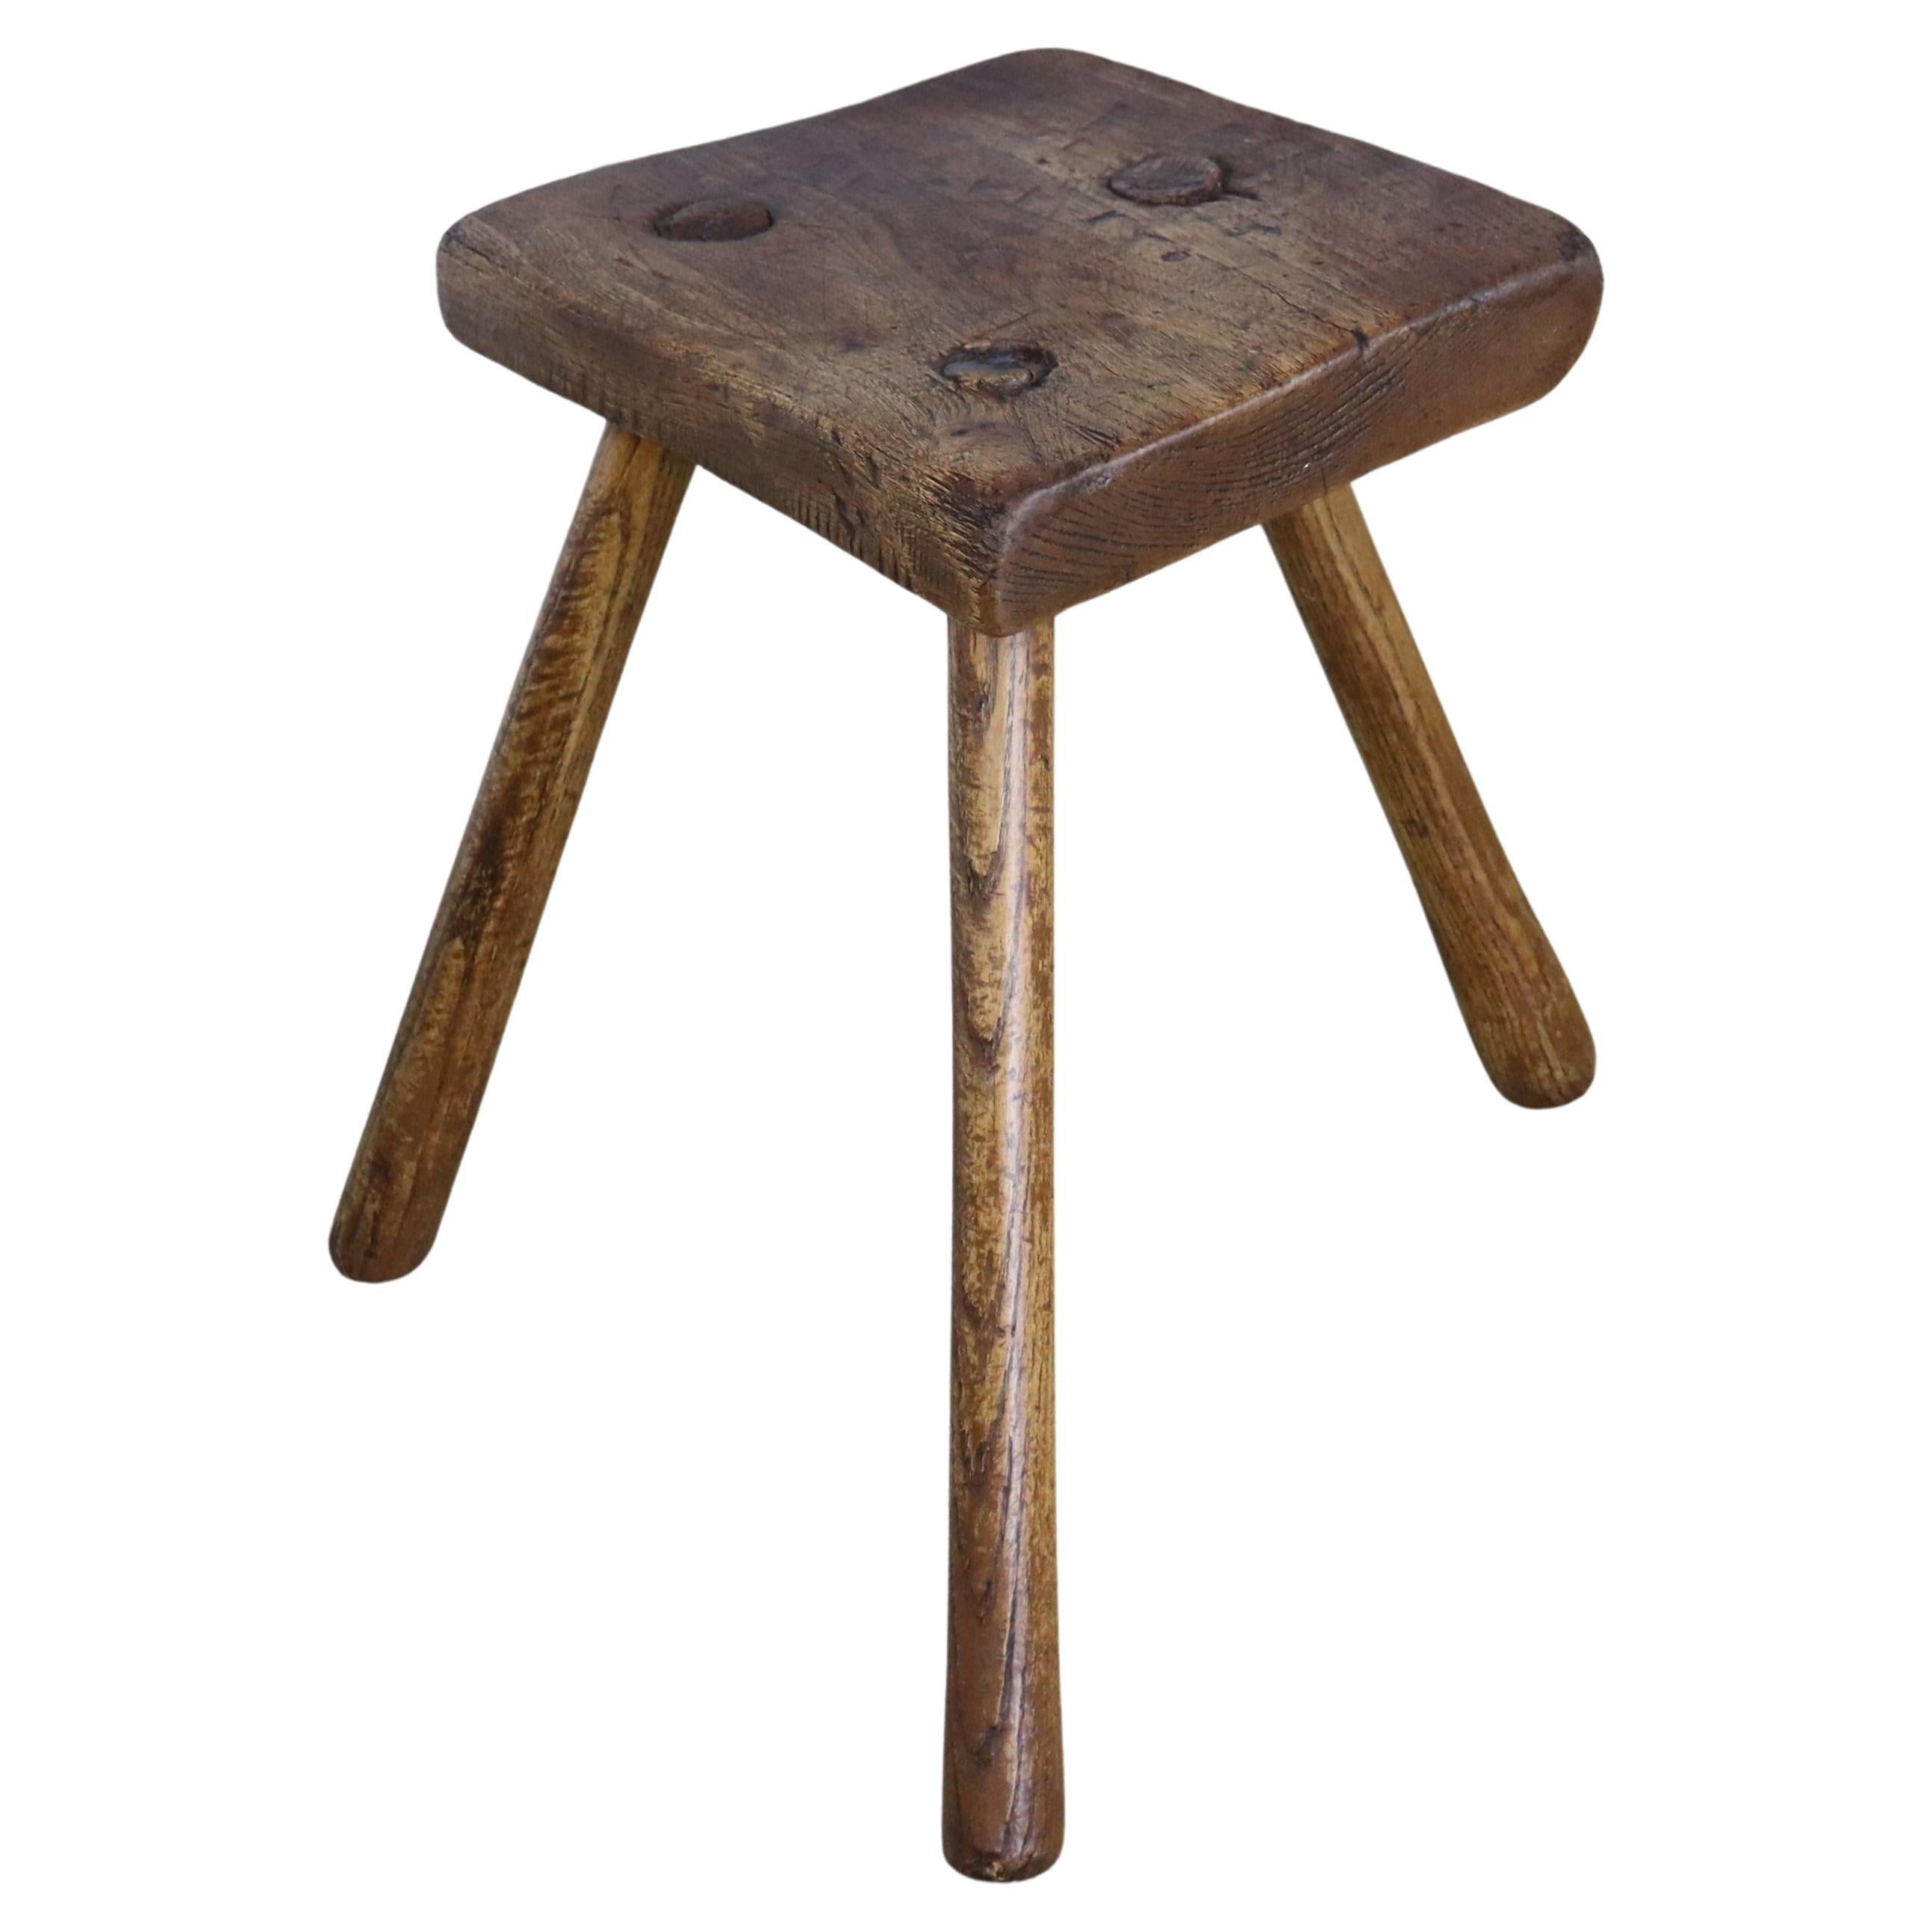 What is milking stool?